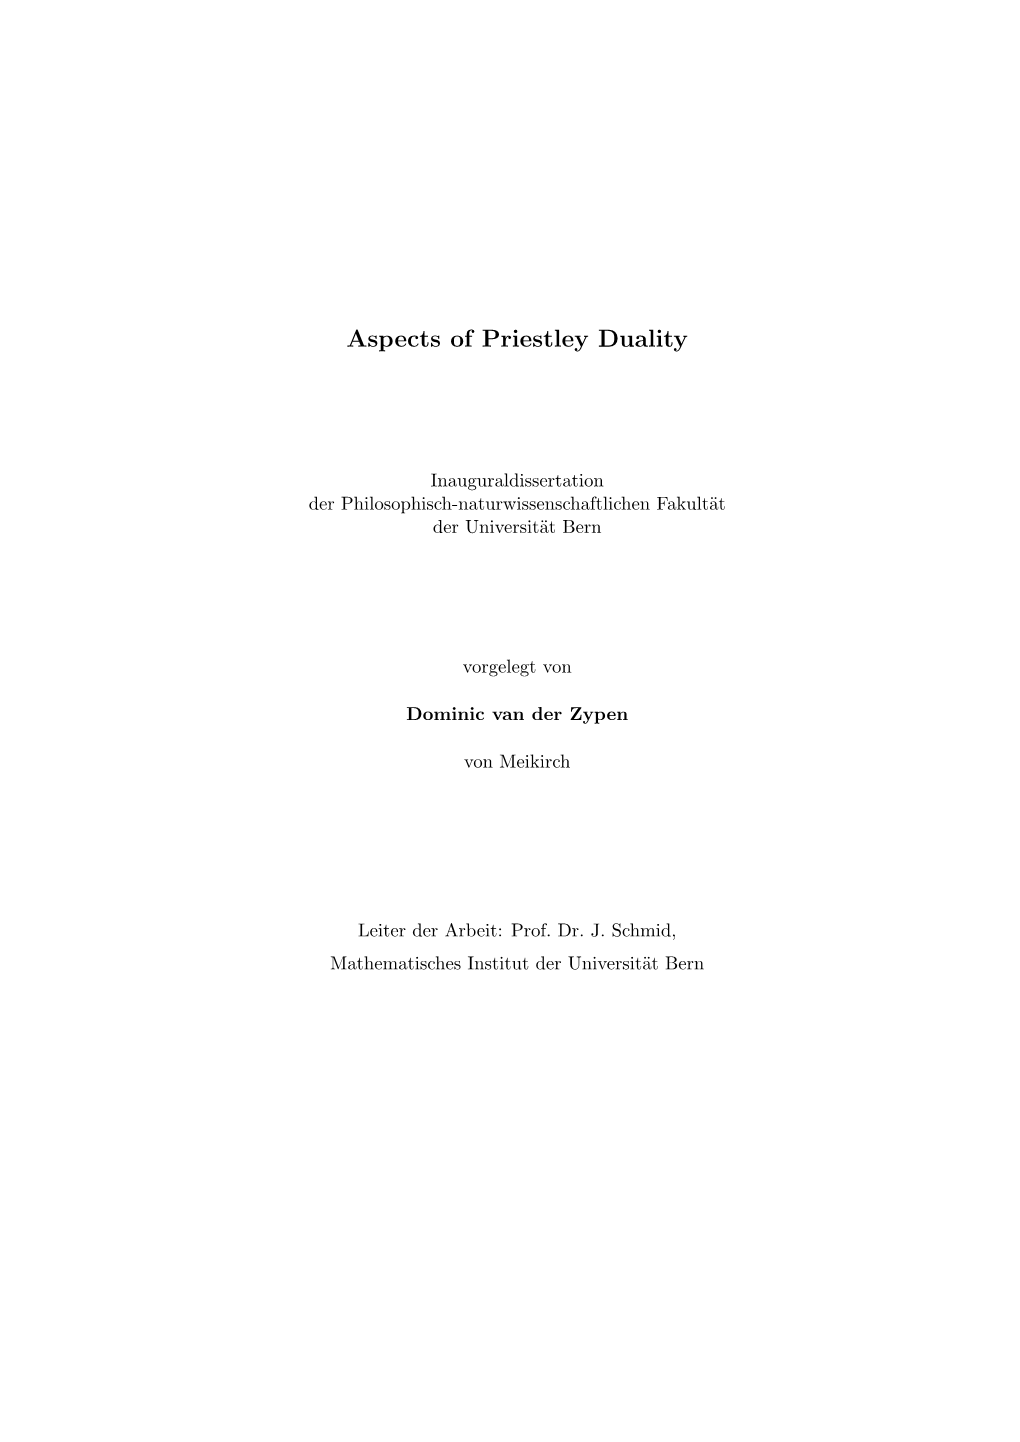 Aspects of Priestley Duality